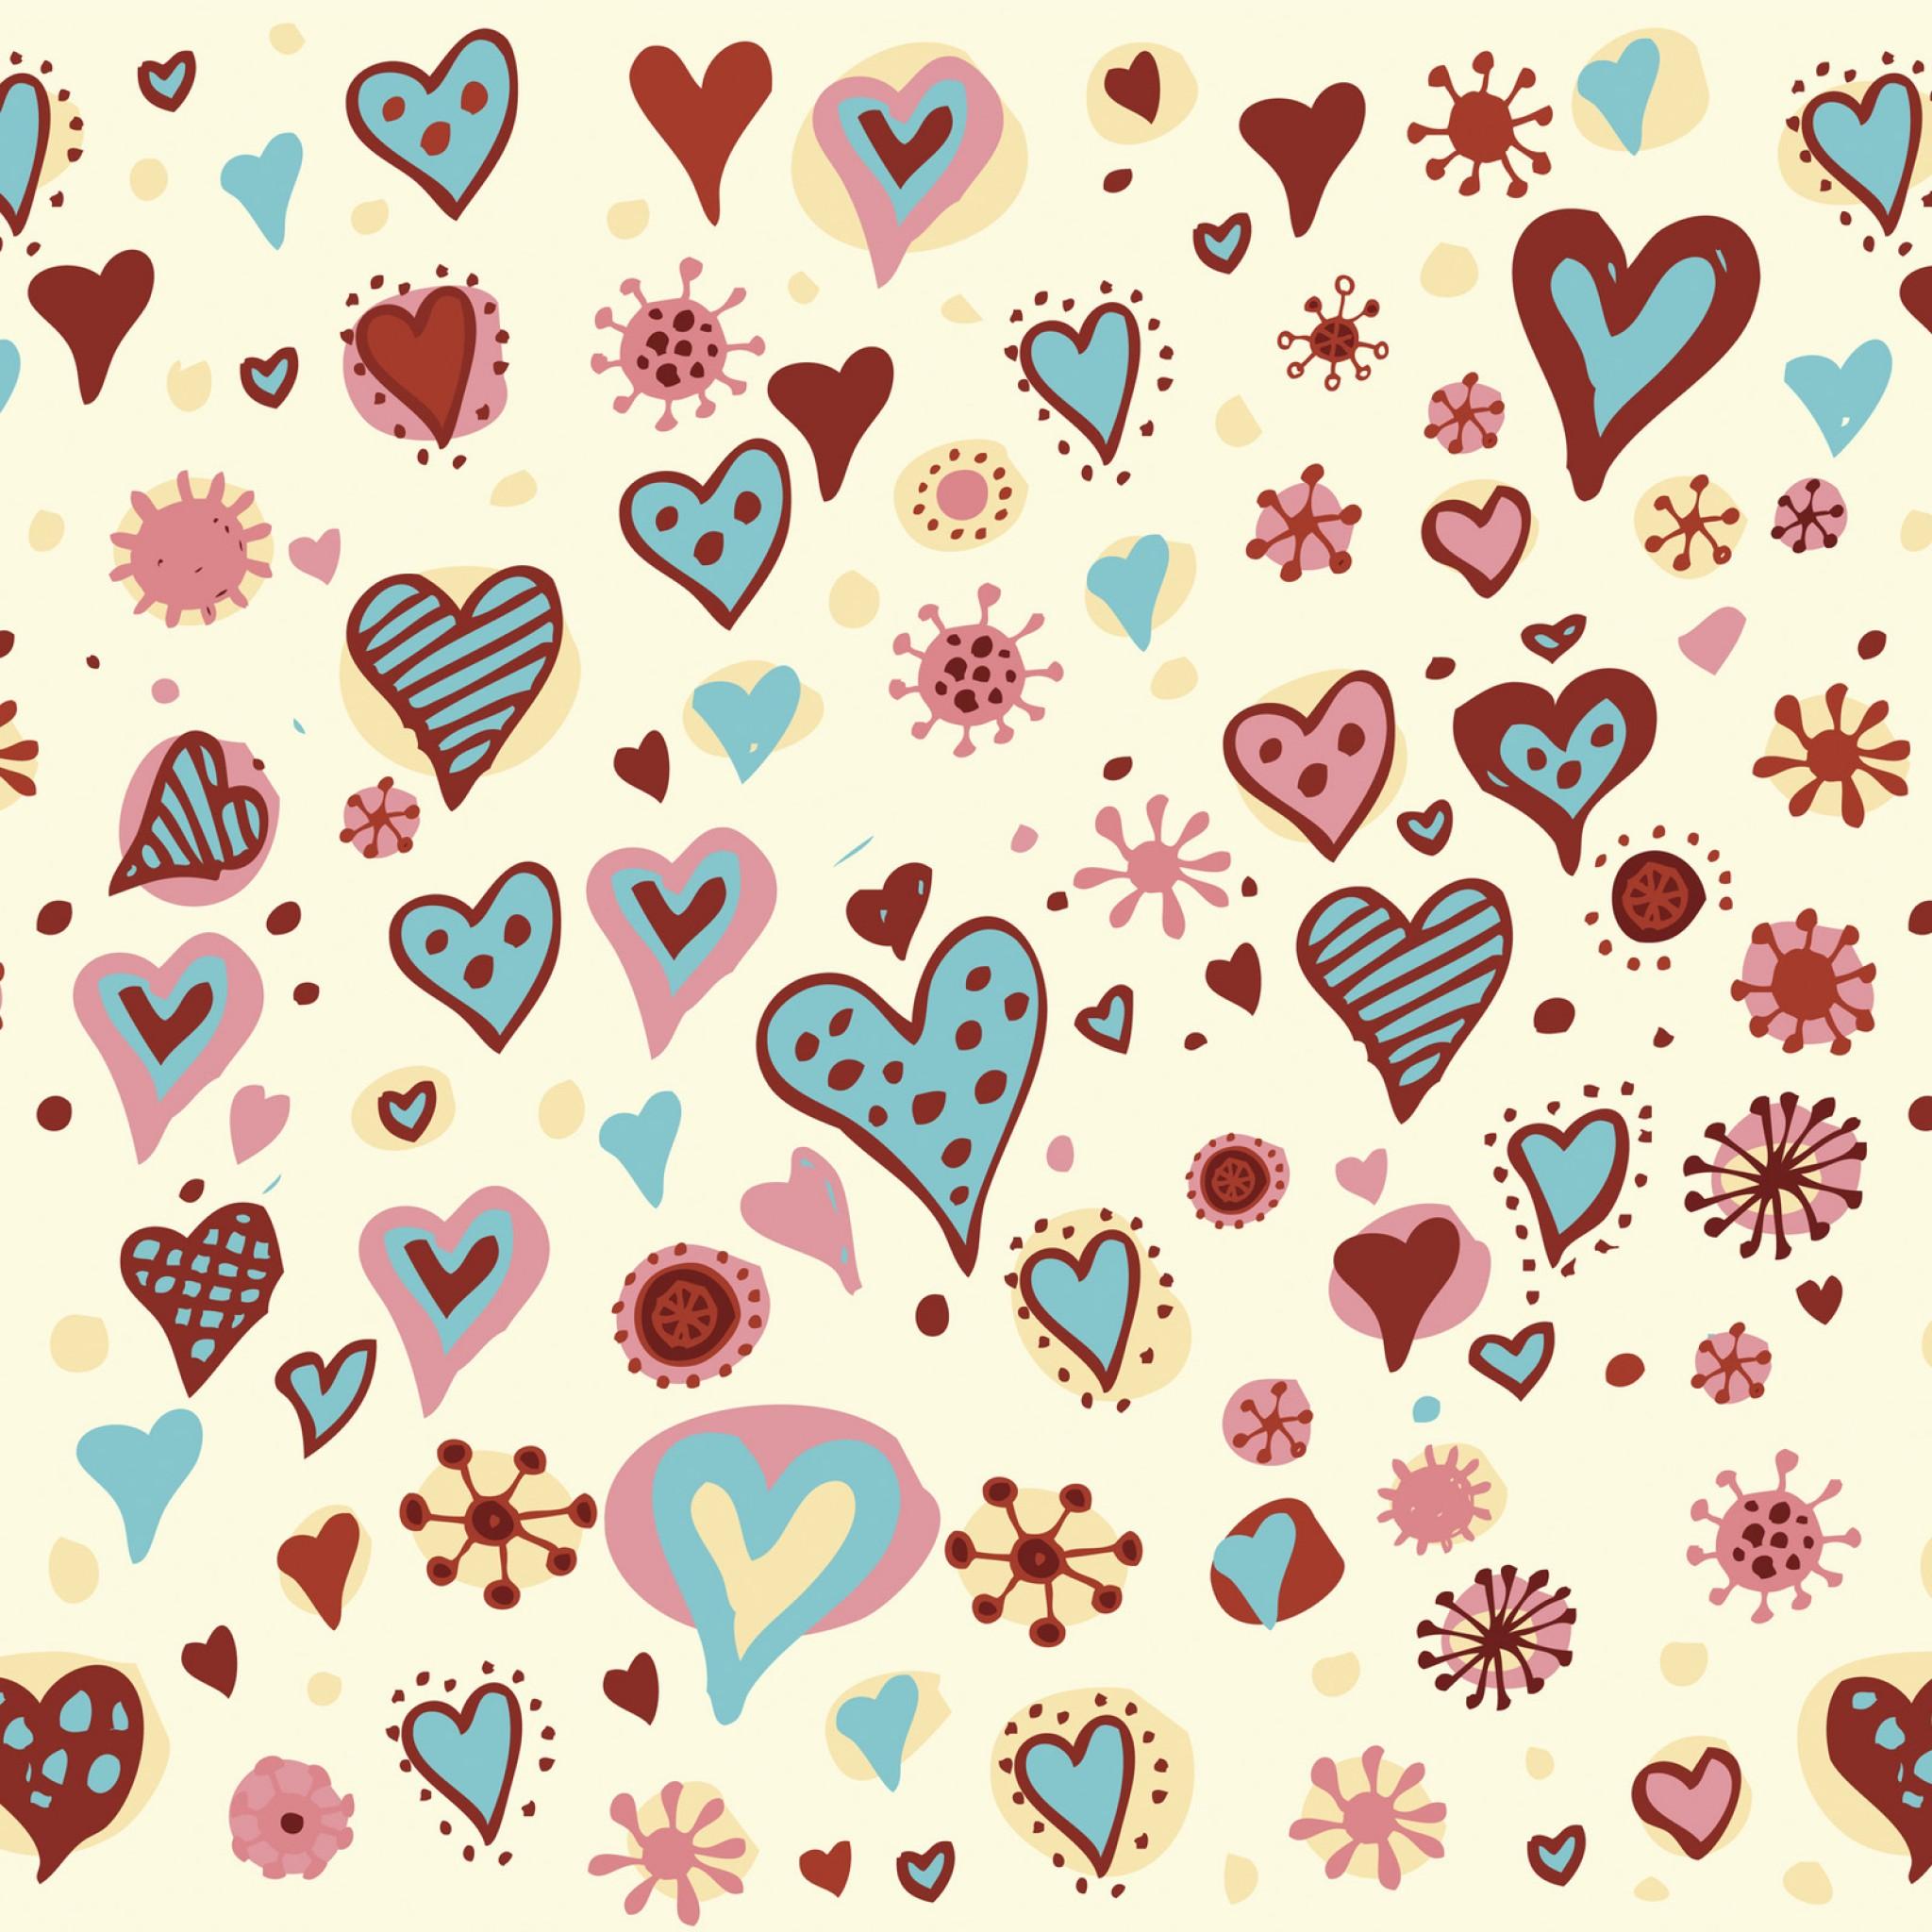 Valentines Day Hearts Textures iPad Air Wallpaper Free Download